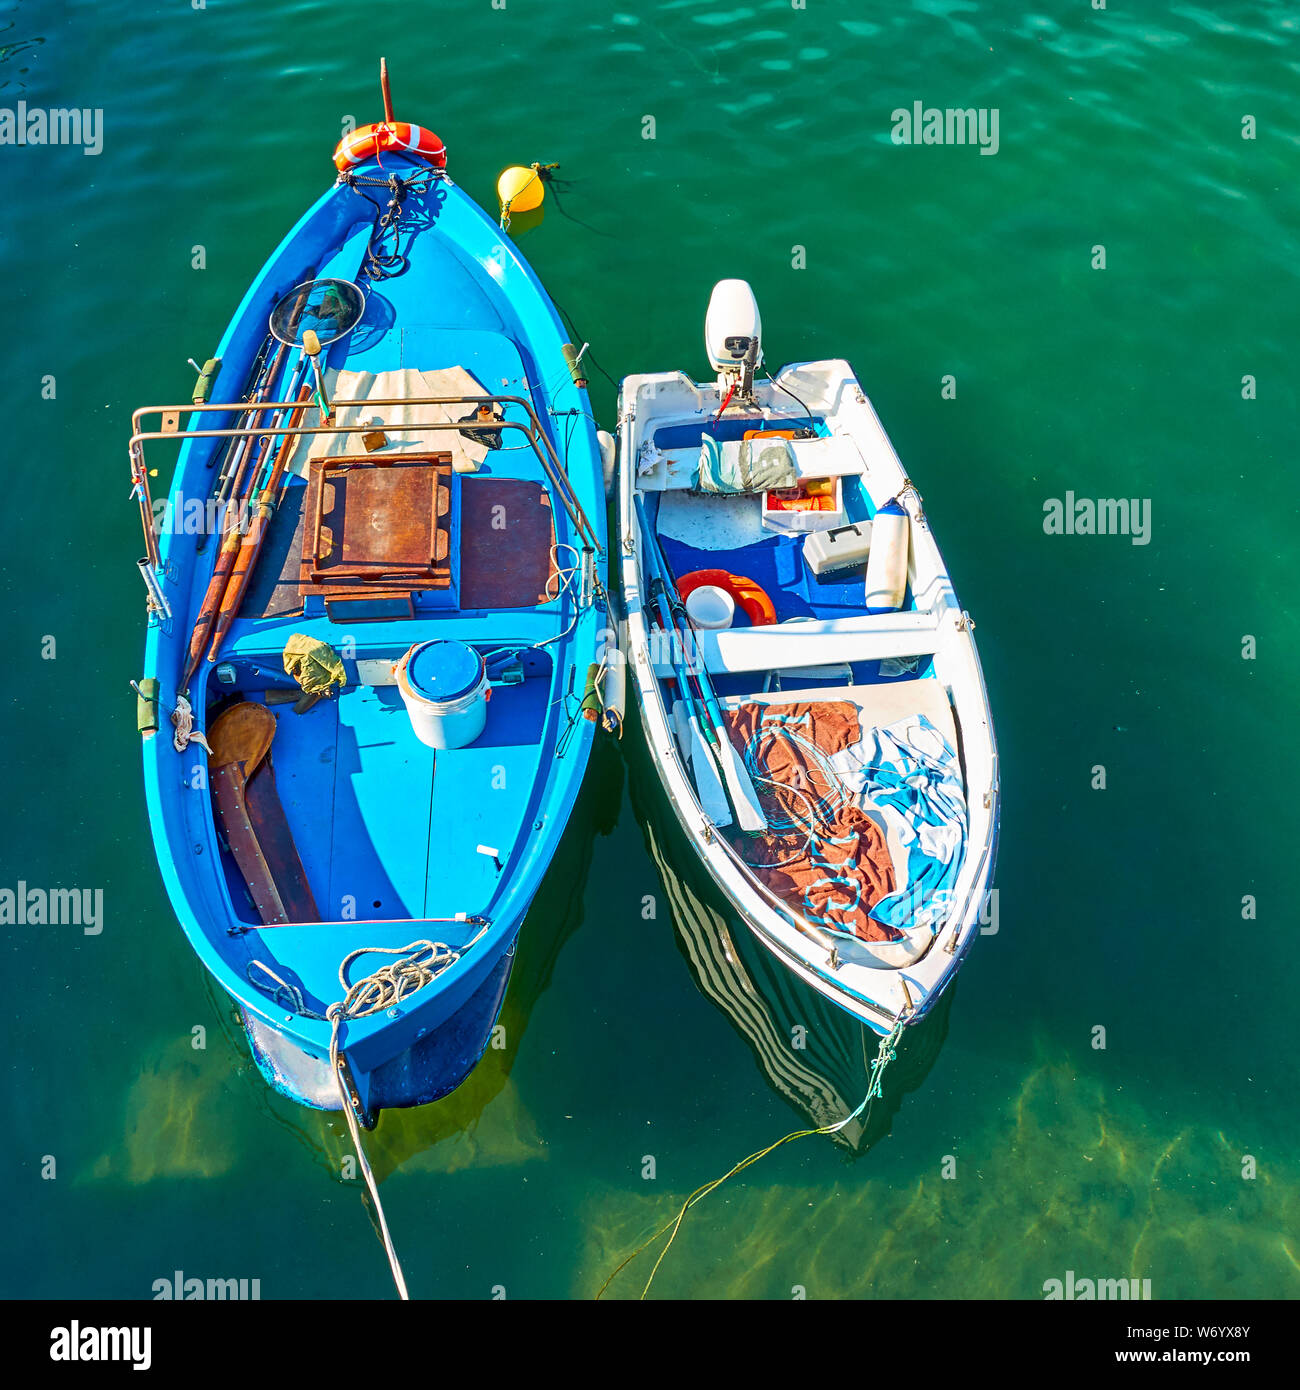 https://c8.alamy.com/comp/W6YX8Y/oar-fishing-boat-and-small-motorboat-with-outfit-for-sea-fishing-inside-W6YX8Y.jpg